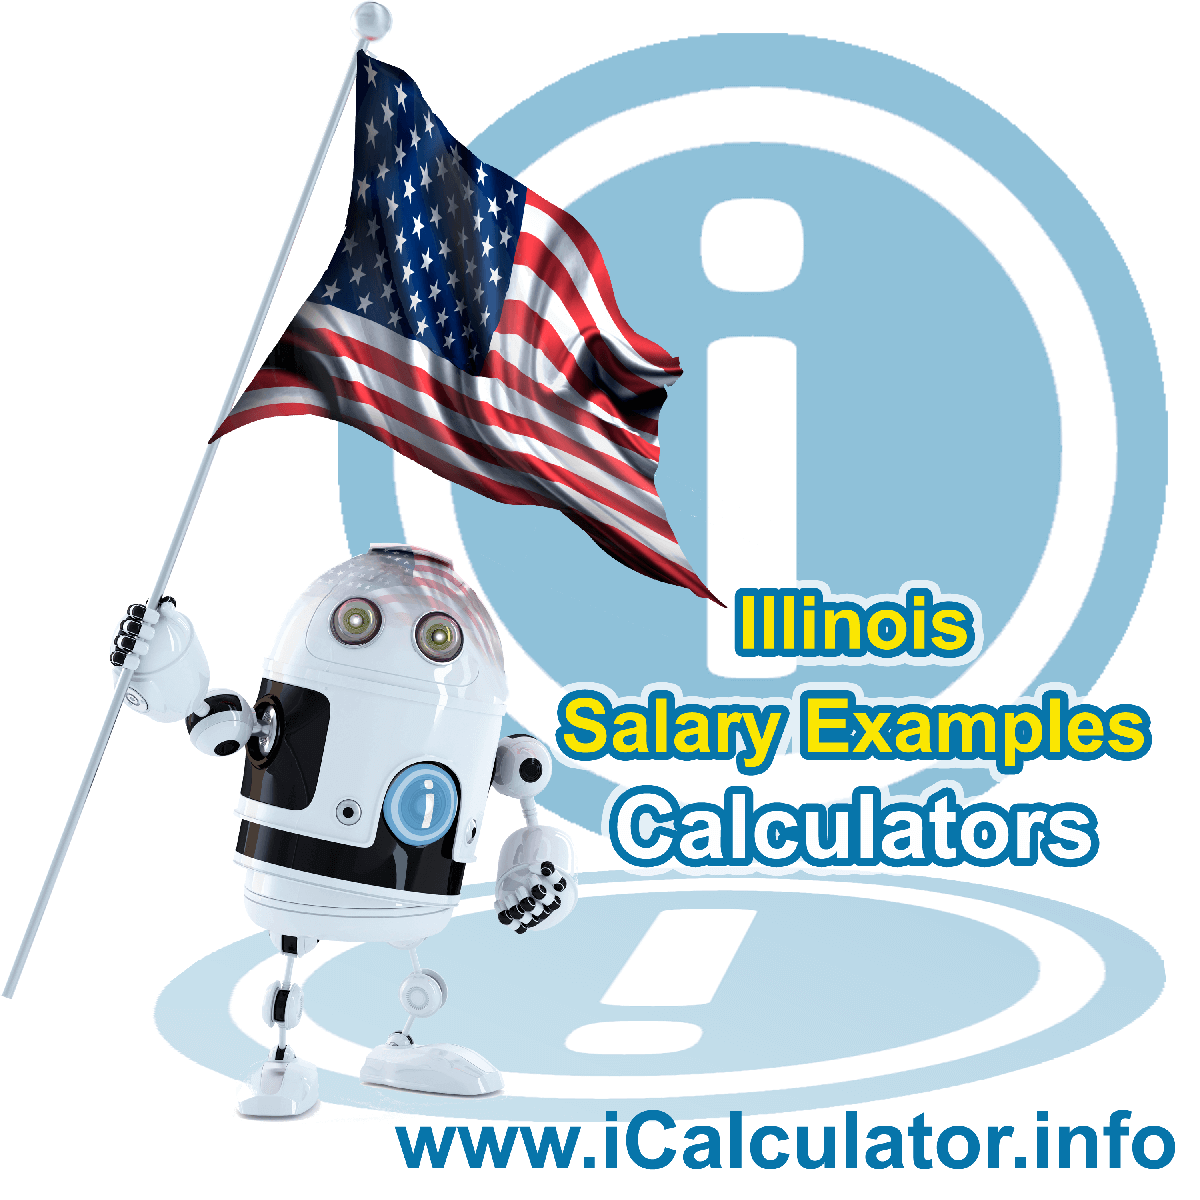 Illinois Salary Example for $ 140,000.00 in 2023 | iCalculator™ | $ 140,000.00 salary example for employee and employer paying Illinois State tincome taxes. Detailed salary after tax calculation including Illinois State Tax, Federal State Tax, Medicare Deductions, Social Security, Capital Gains and other income tax and salary deductions complete with supporting Illinois state tax tables 